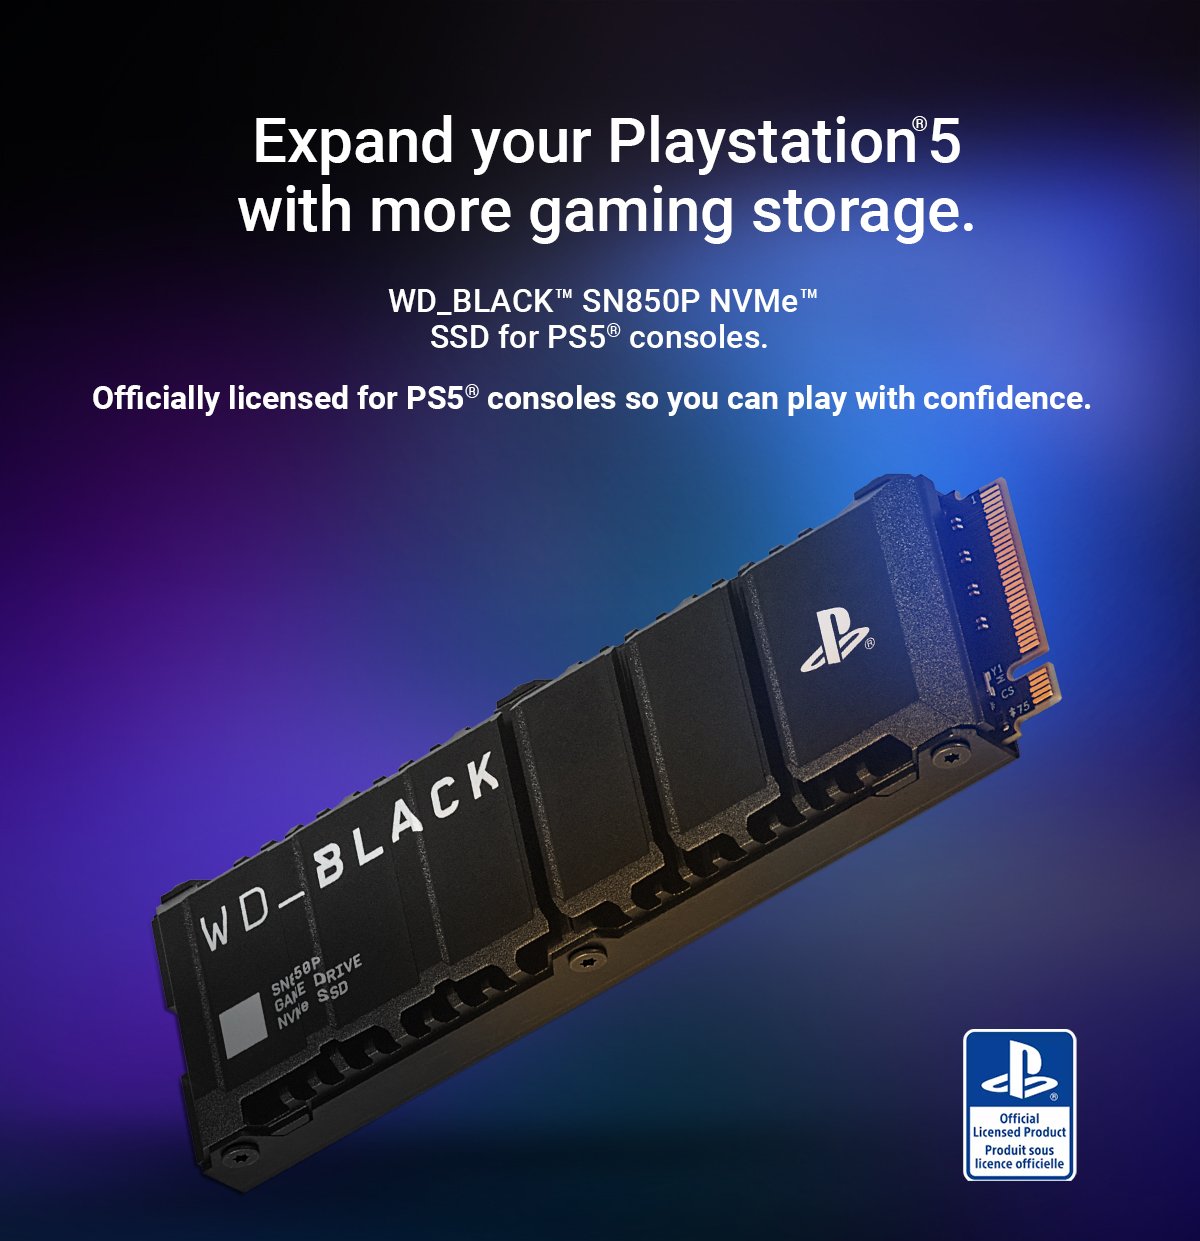 Western Digital launches a new PS5 SSD: The WD Black SN850P